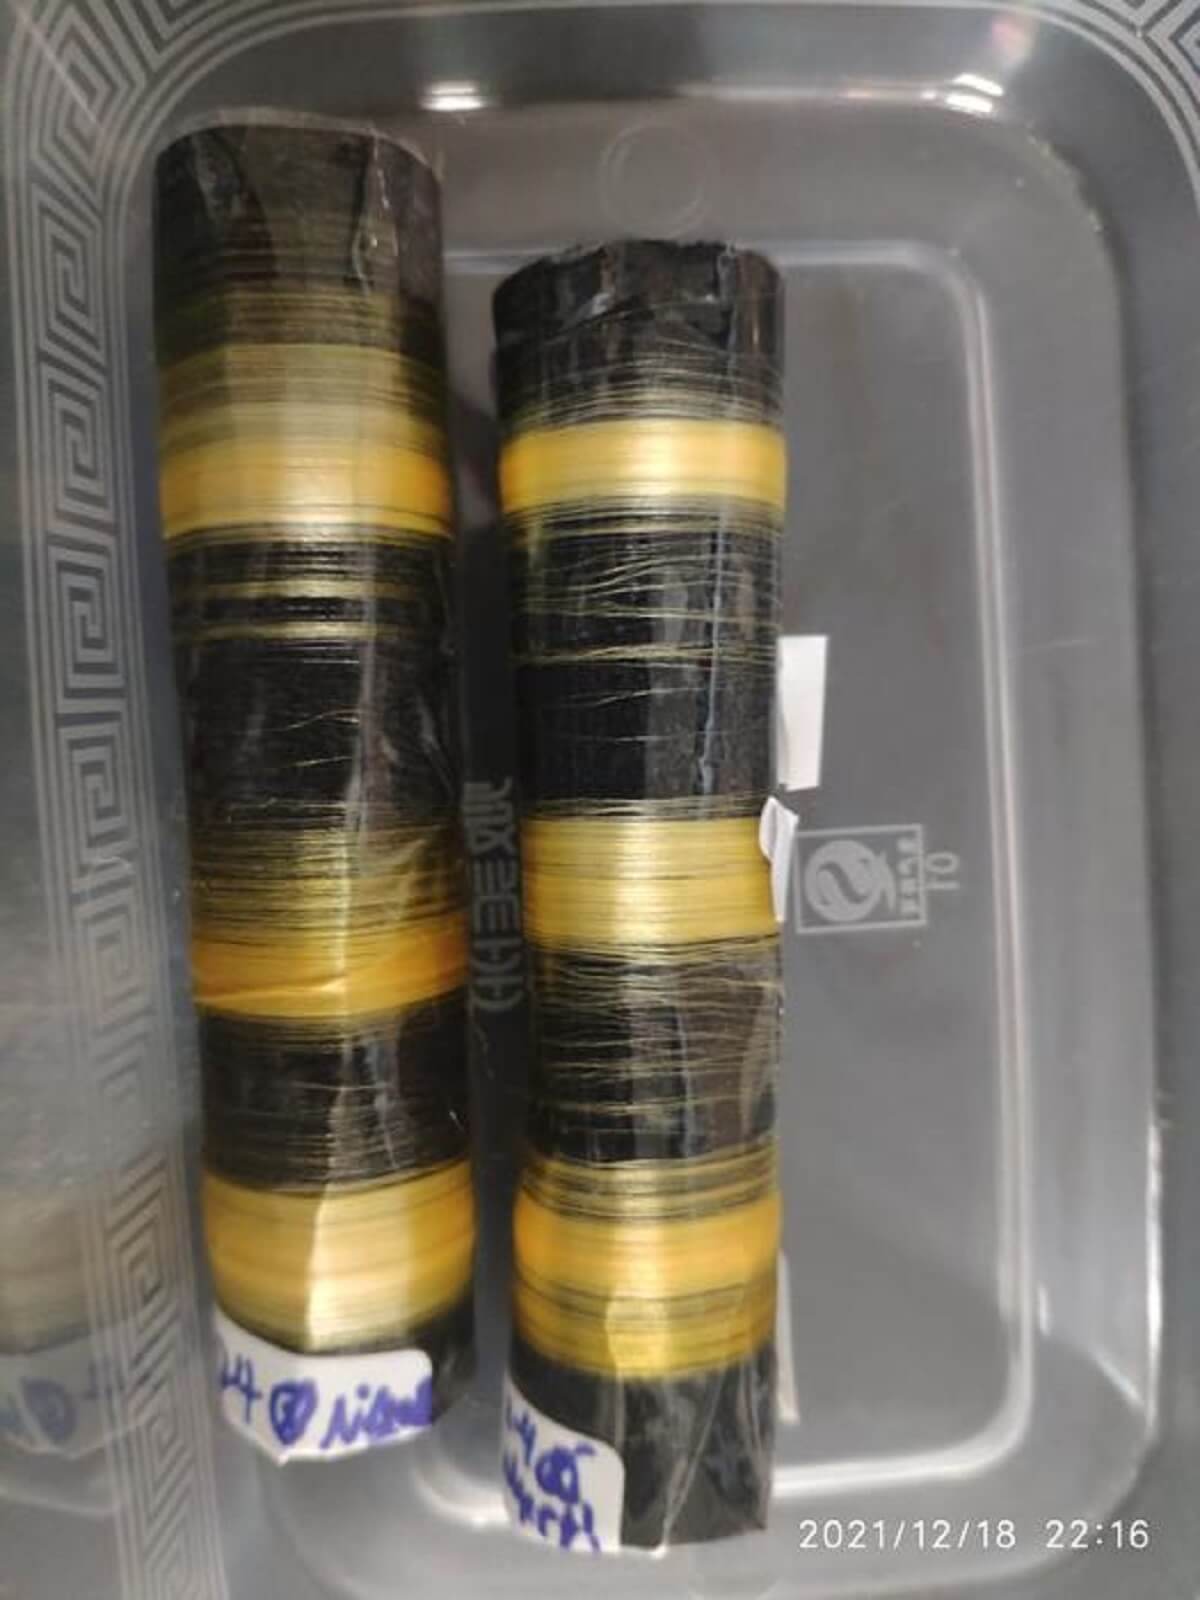 yellow and black Silk fibers produced by transgenic silkworms.